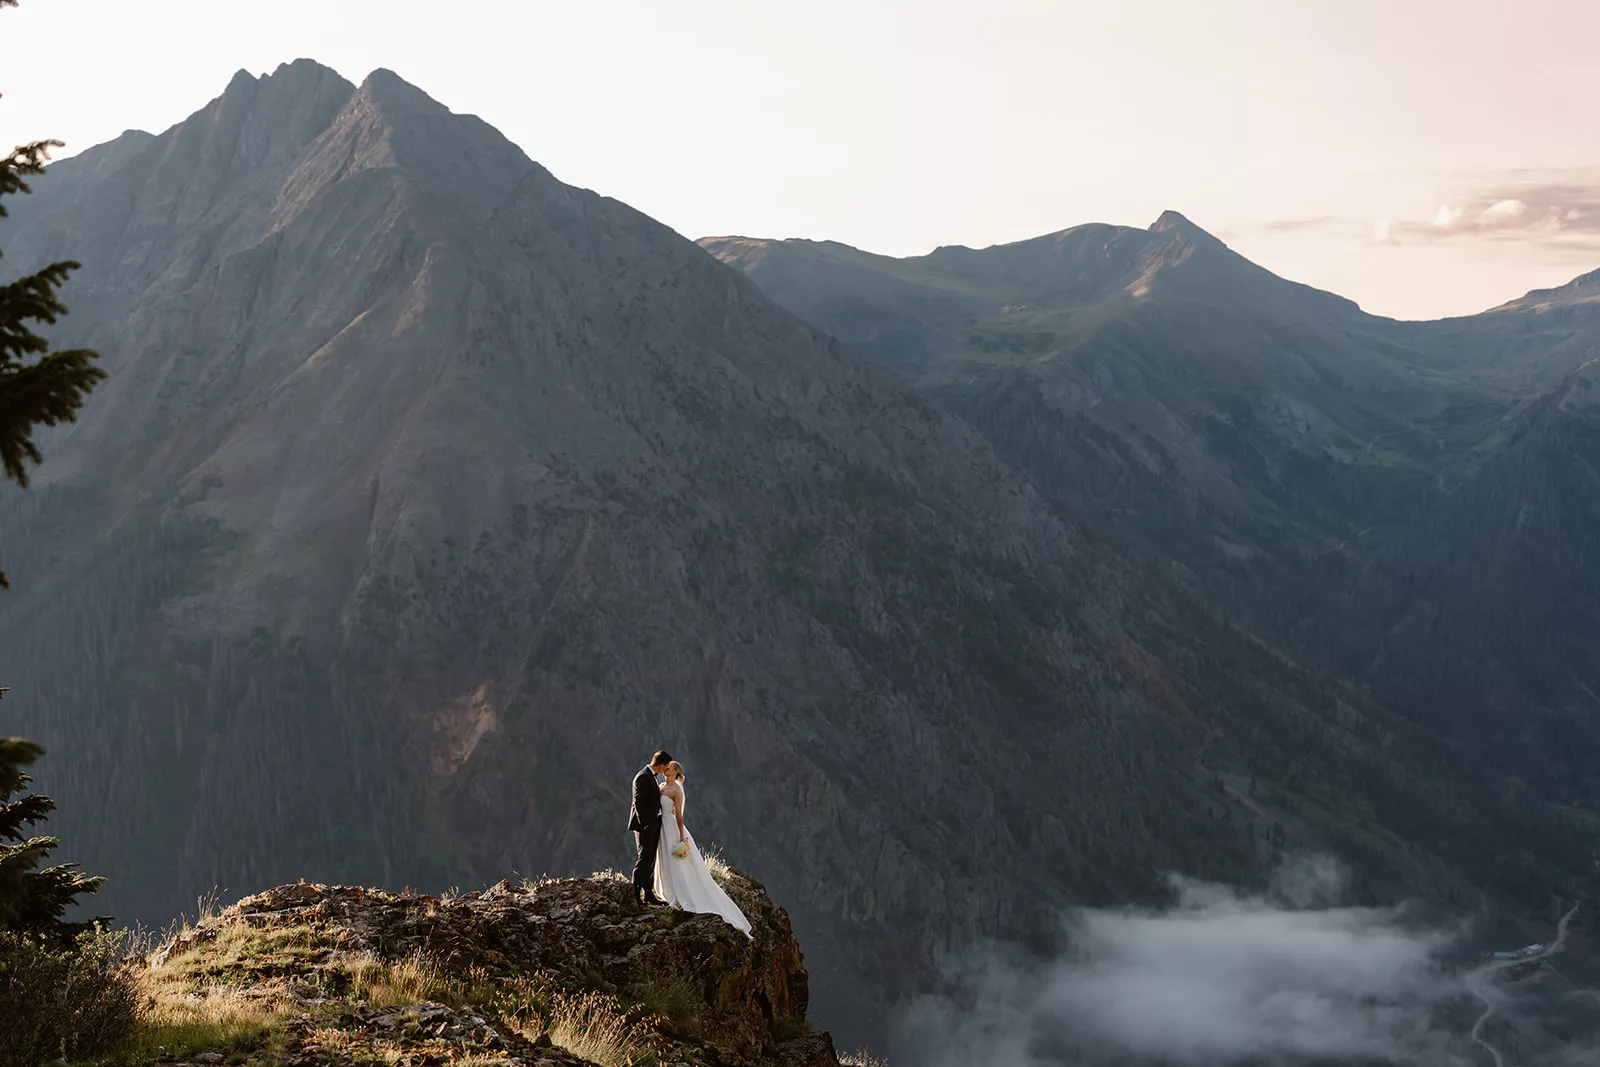 A bride and groom pose as the alpenglow comes up during their san juan mountain elopement.